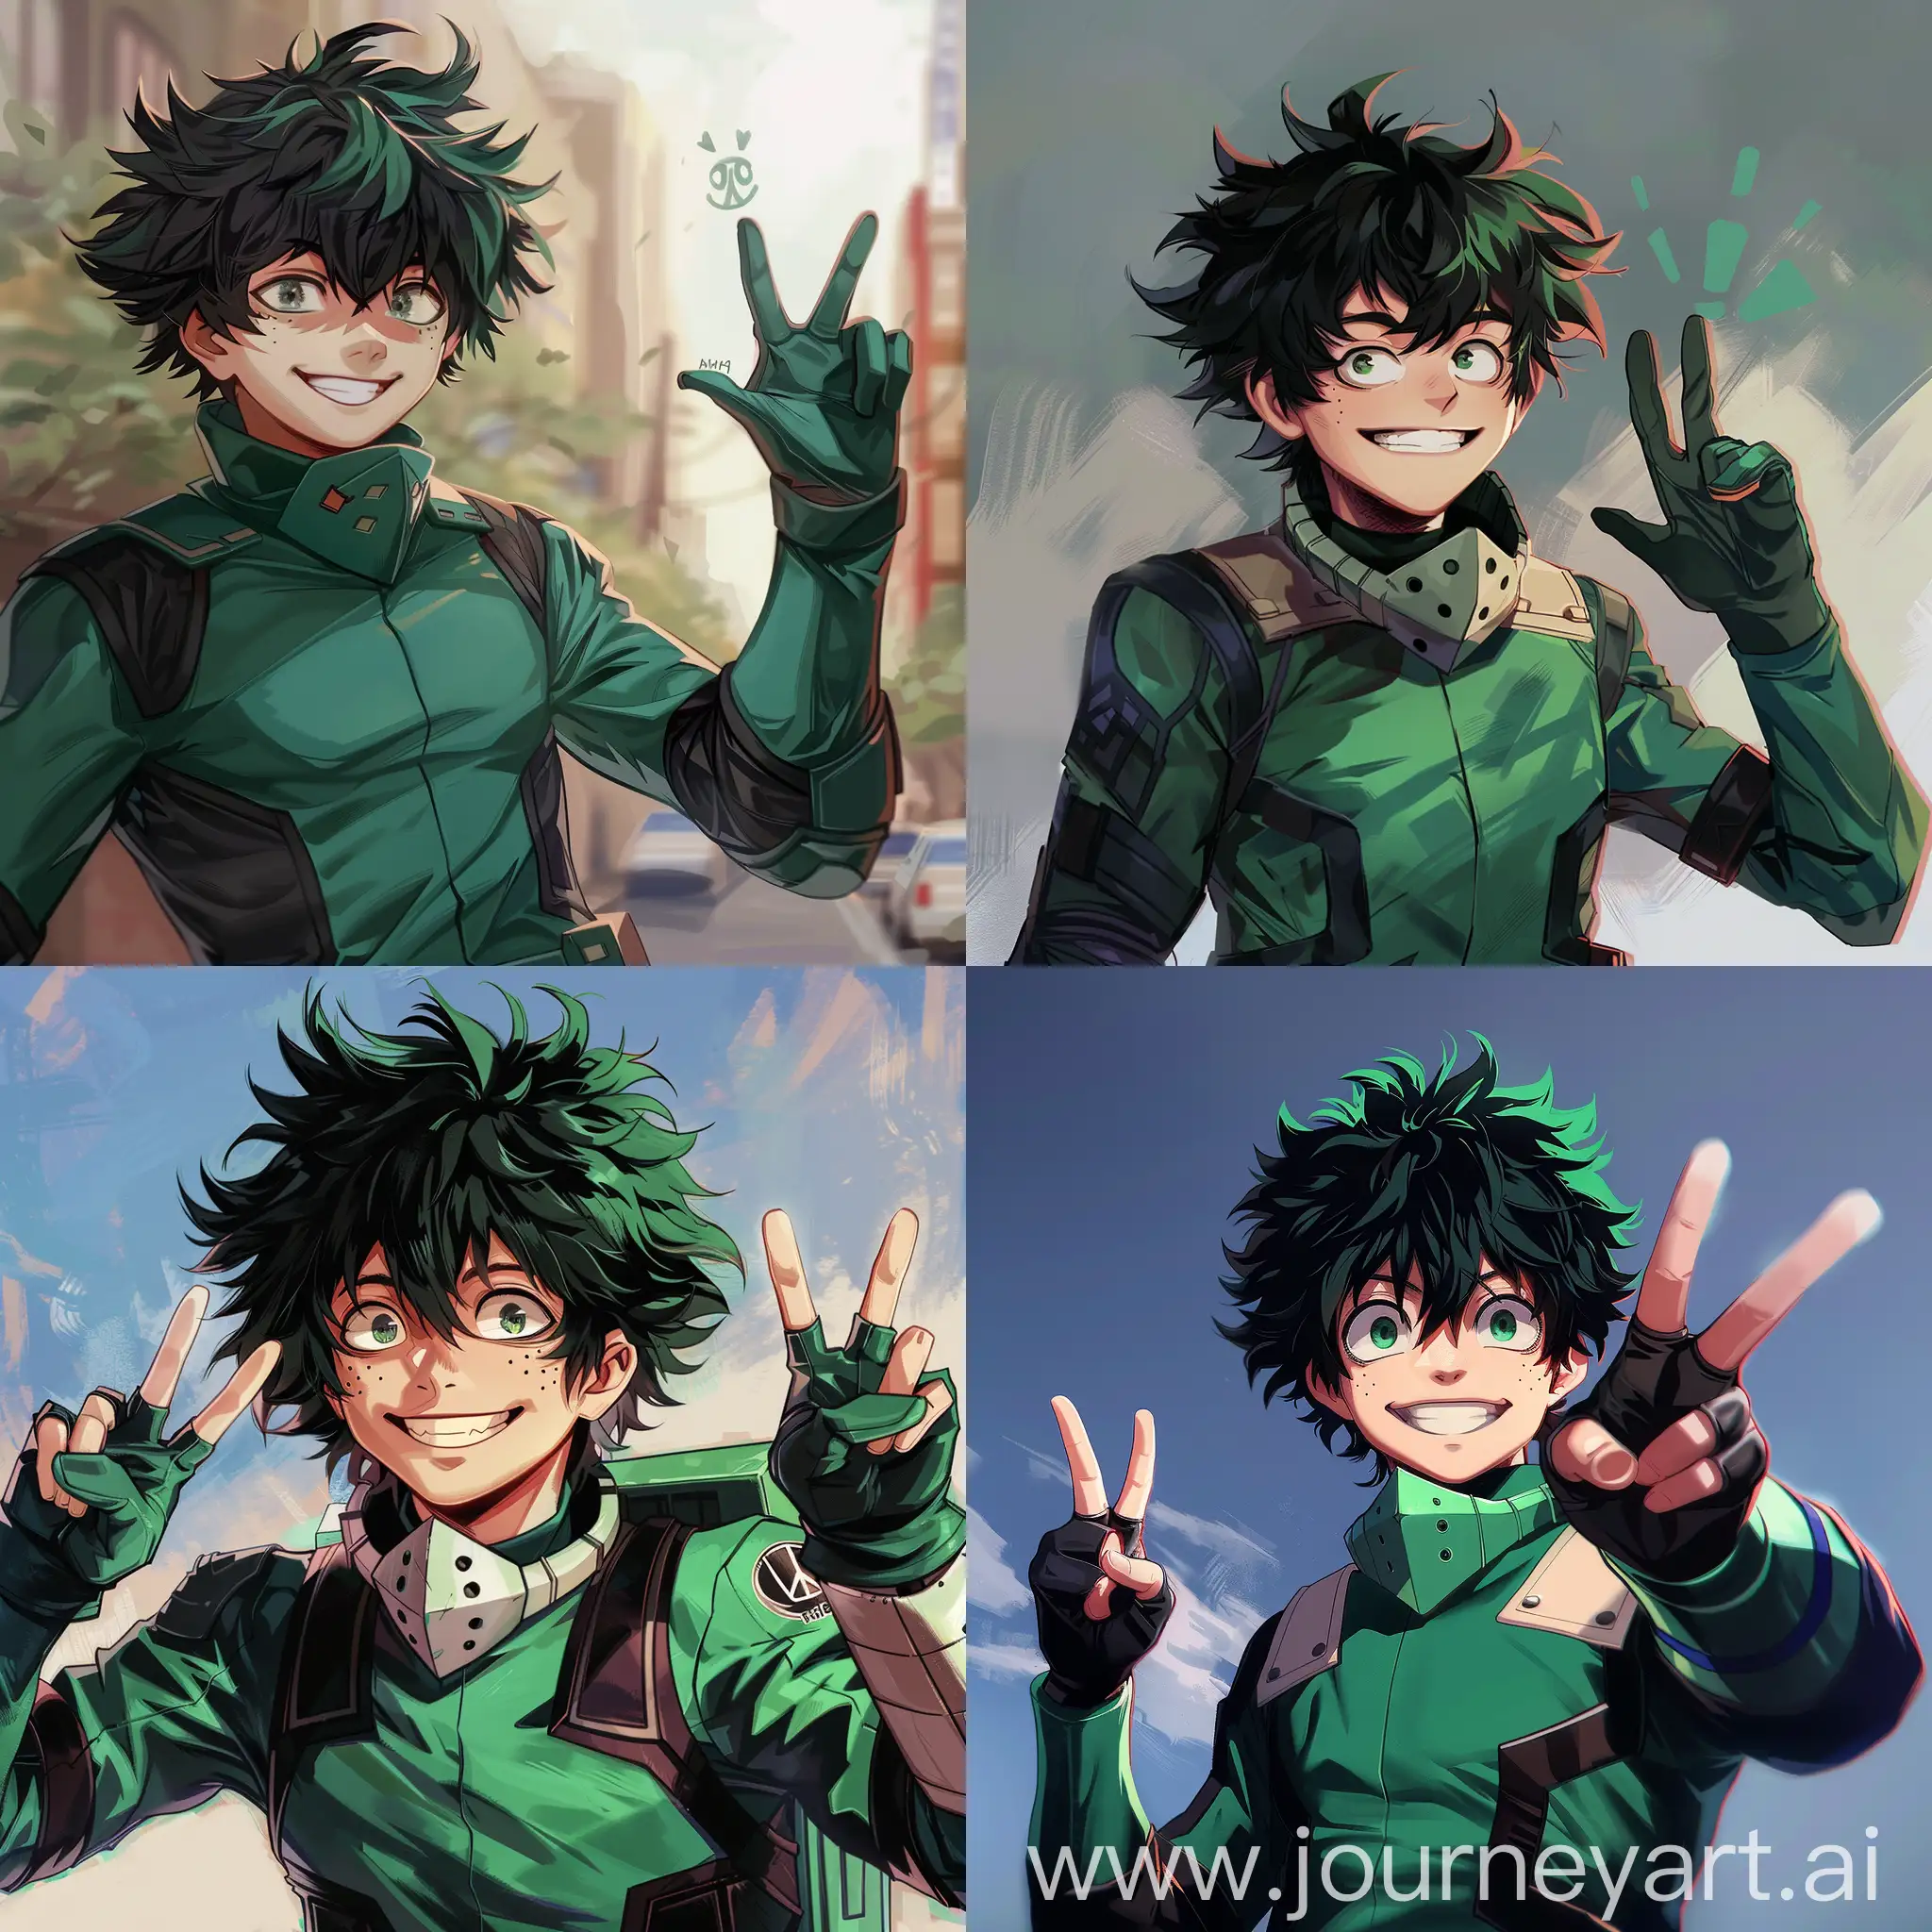 Deku-from-MHA-Wearing-Green-Costume-Smiling-with-Peace-Sign-in-Aesthetic-Anime-Art